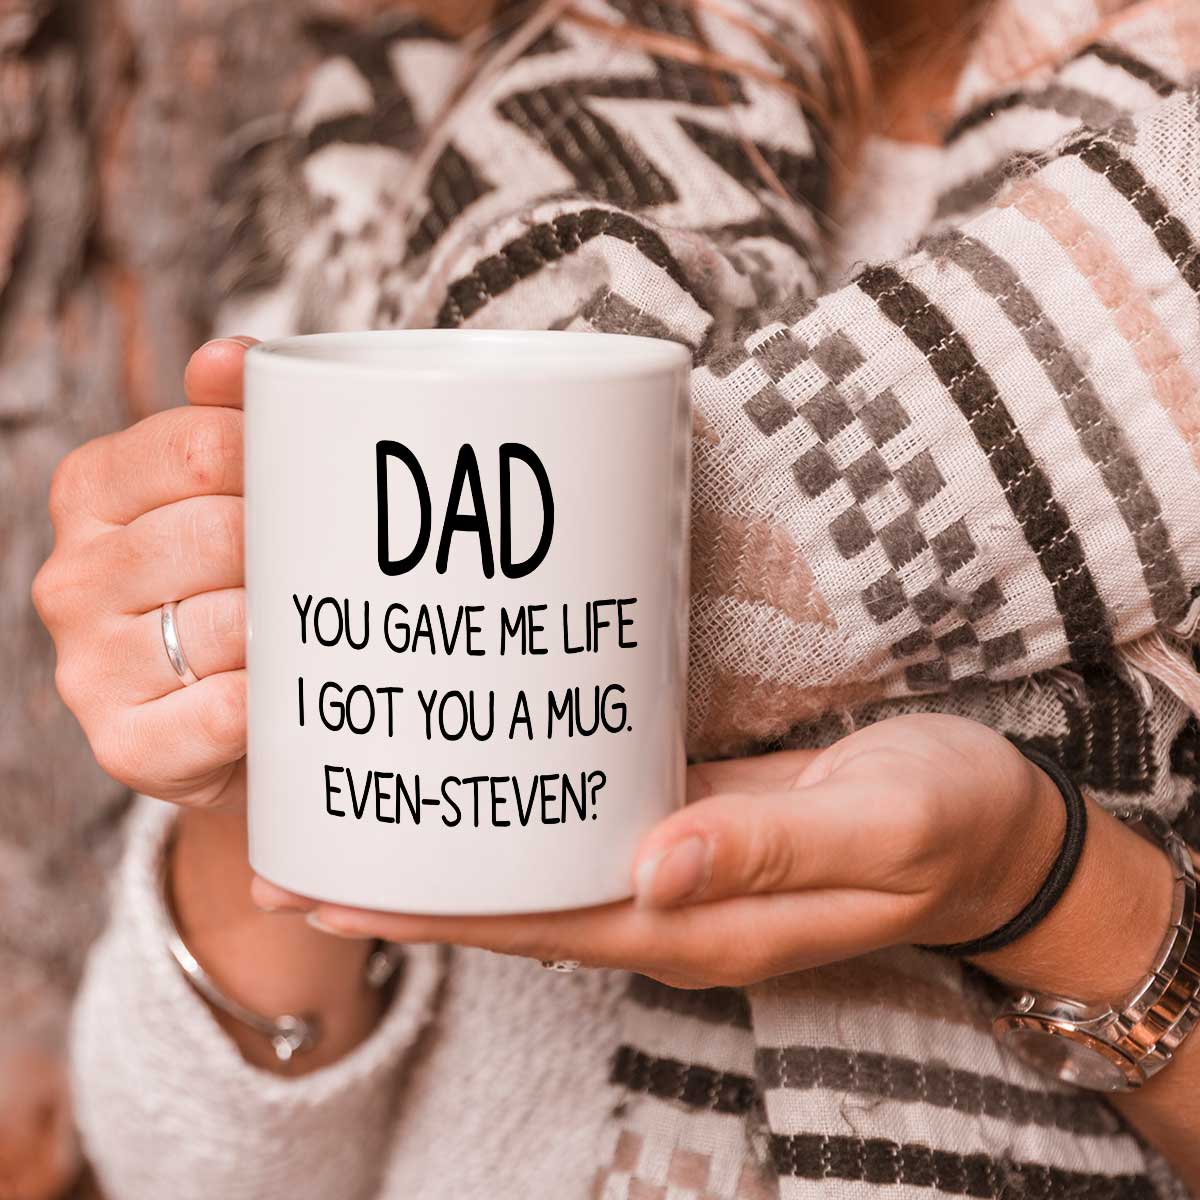 Dear Dad: Thanks for Putting Up With A Bratty Child Coffee Mug